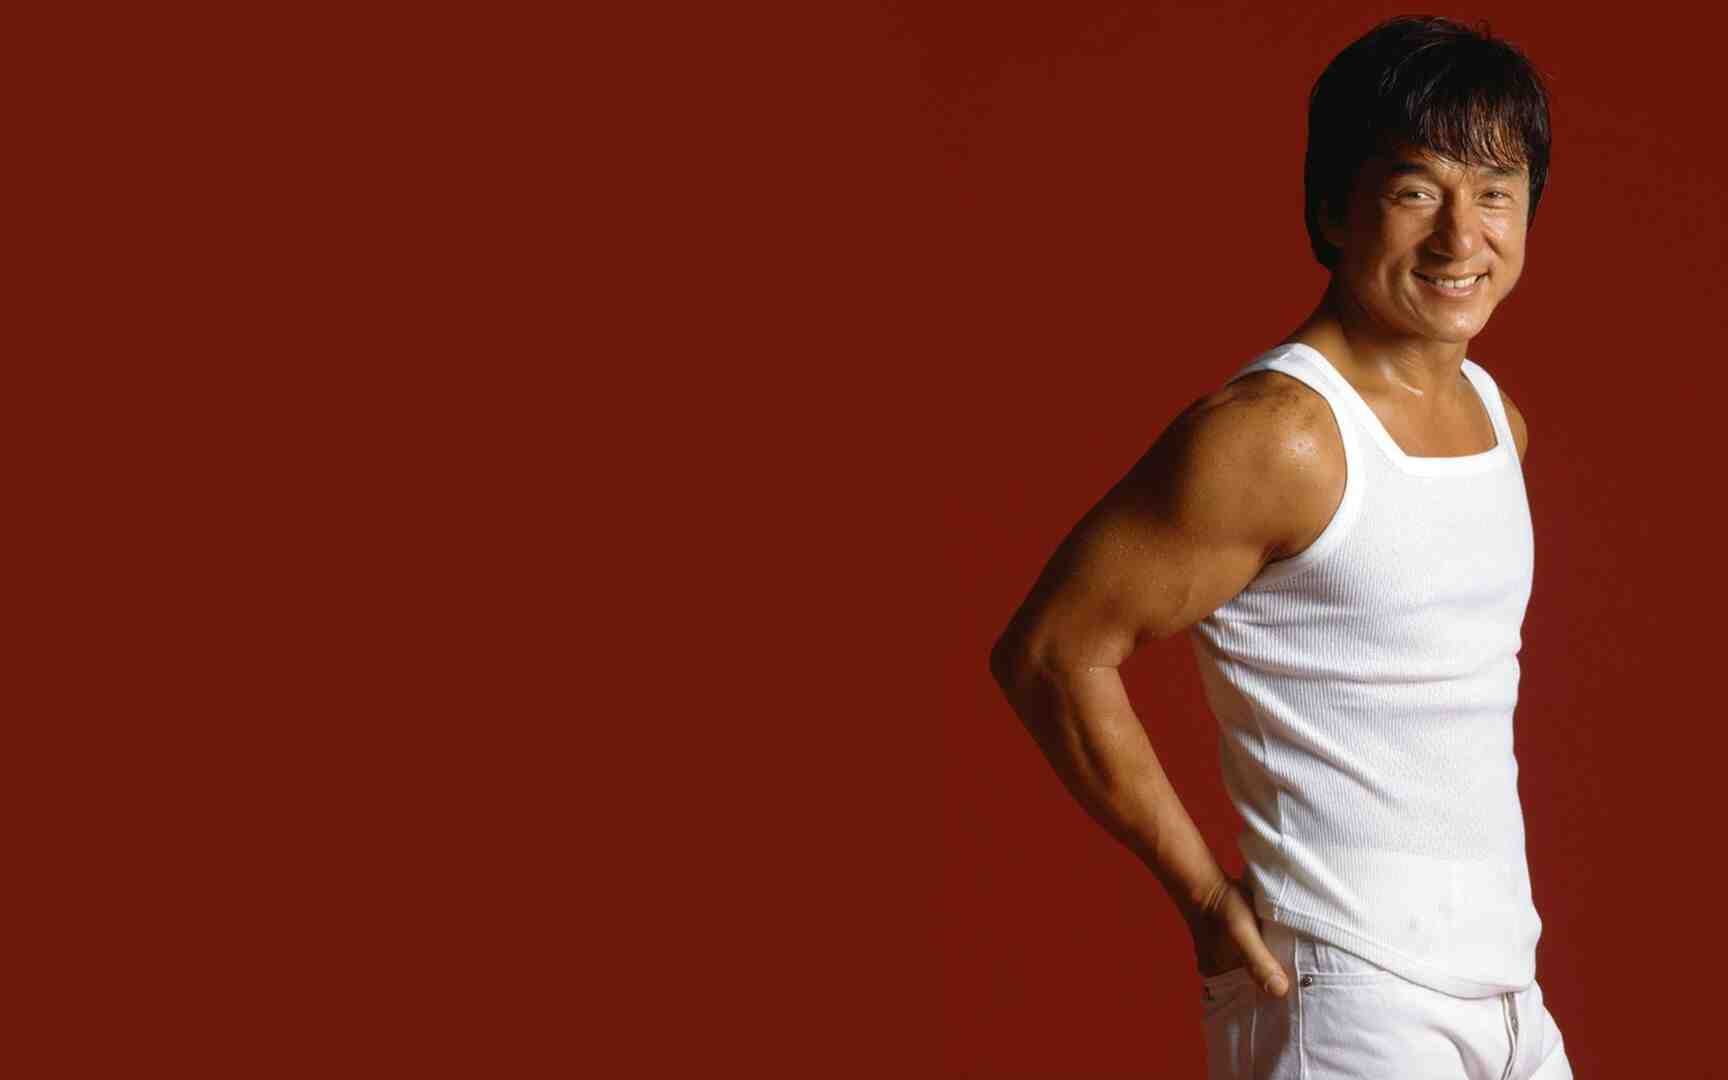 Which martial art did Jackie Chan learn?